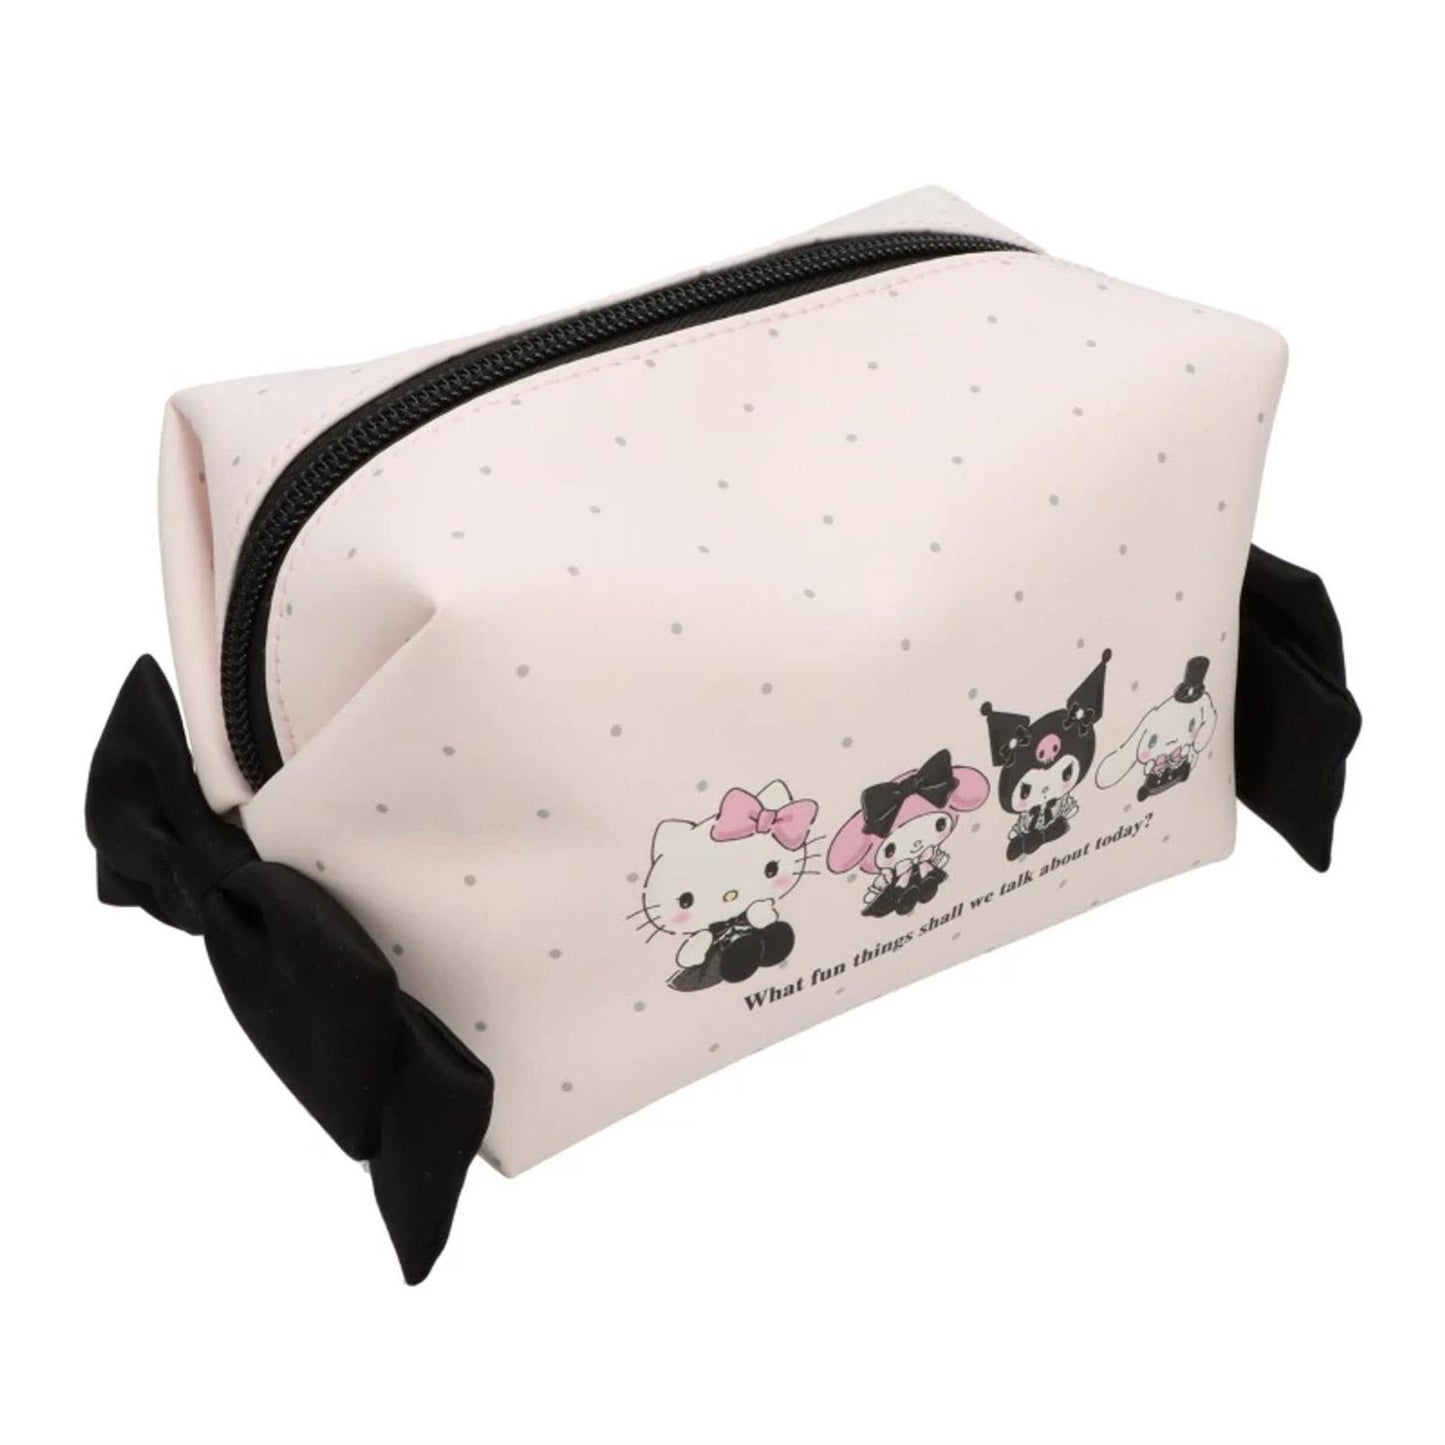 Sanrio SWEET PARTY Pouch